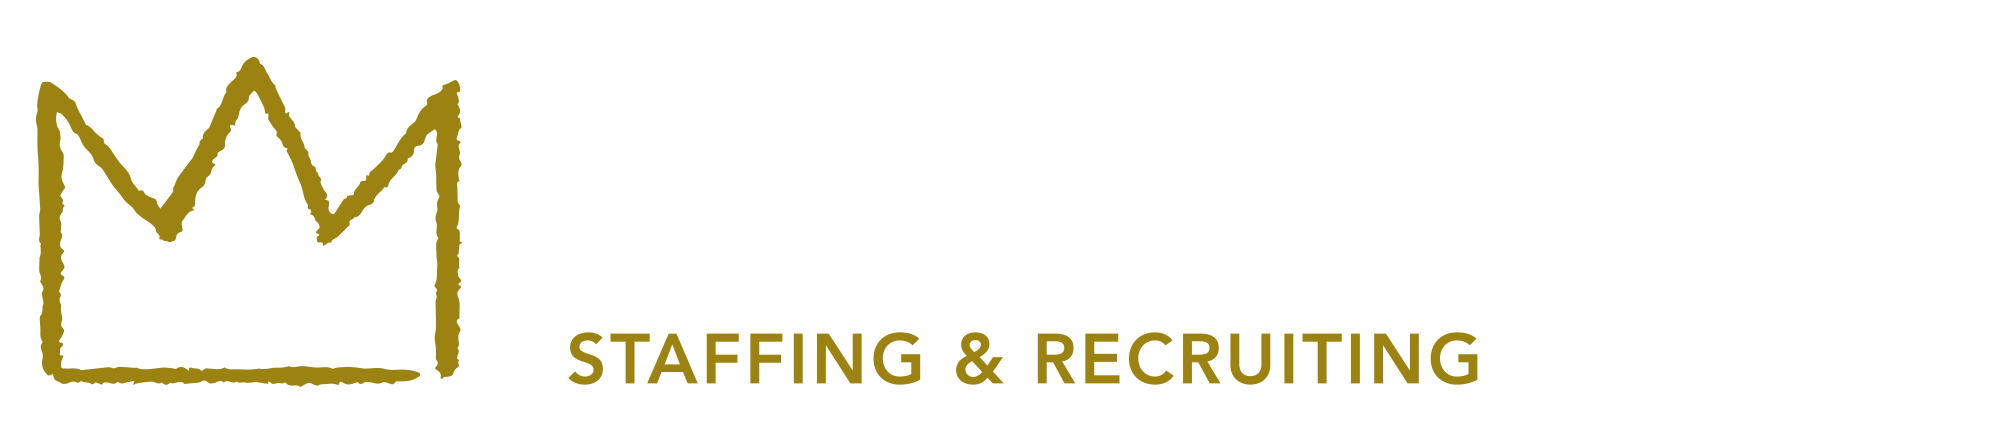 The Axel Group